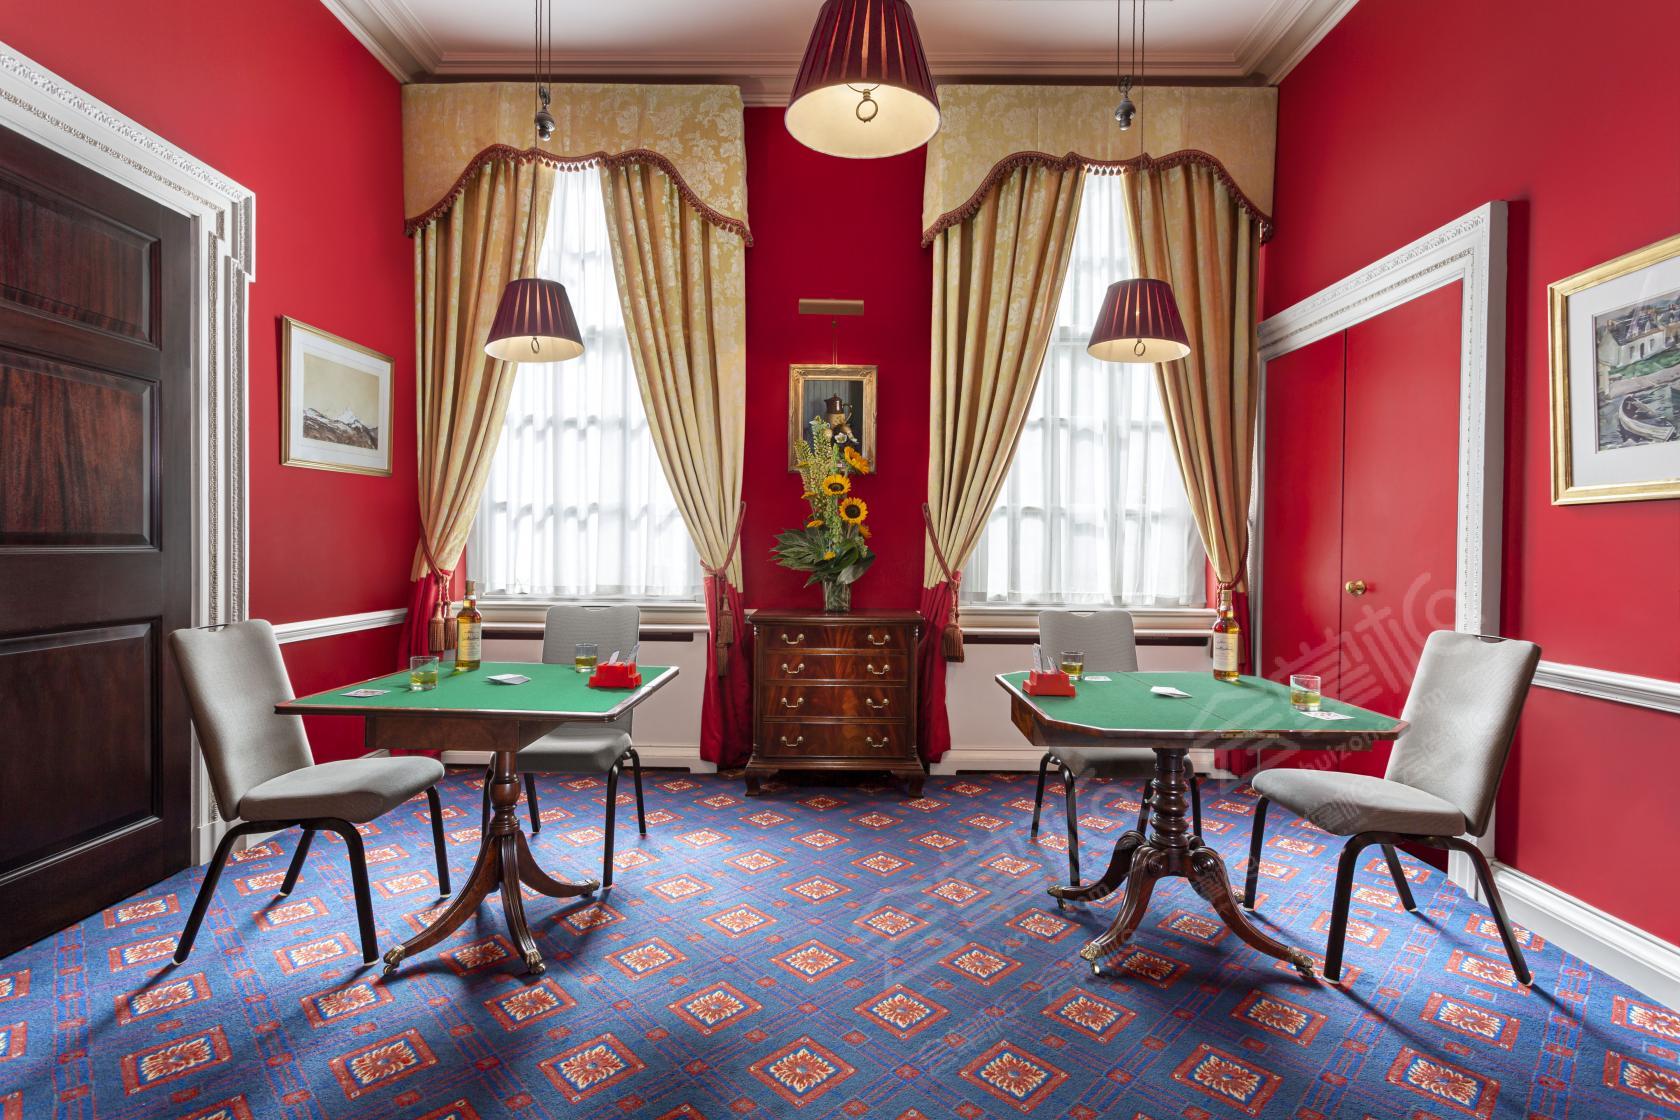 The Card Room